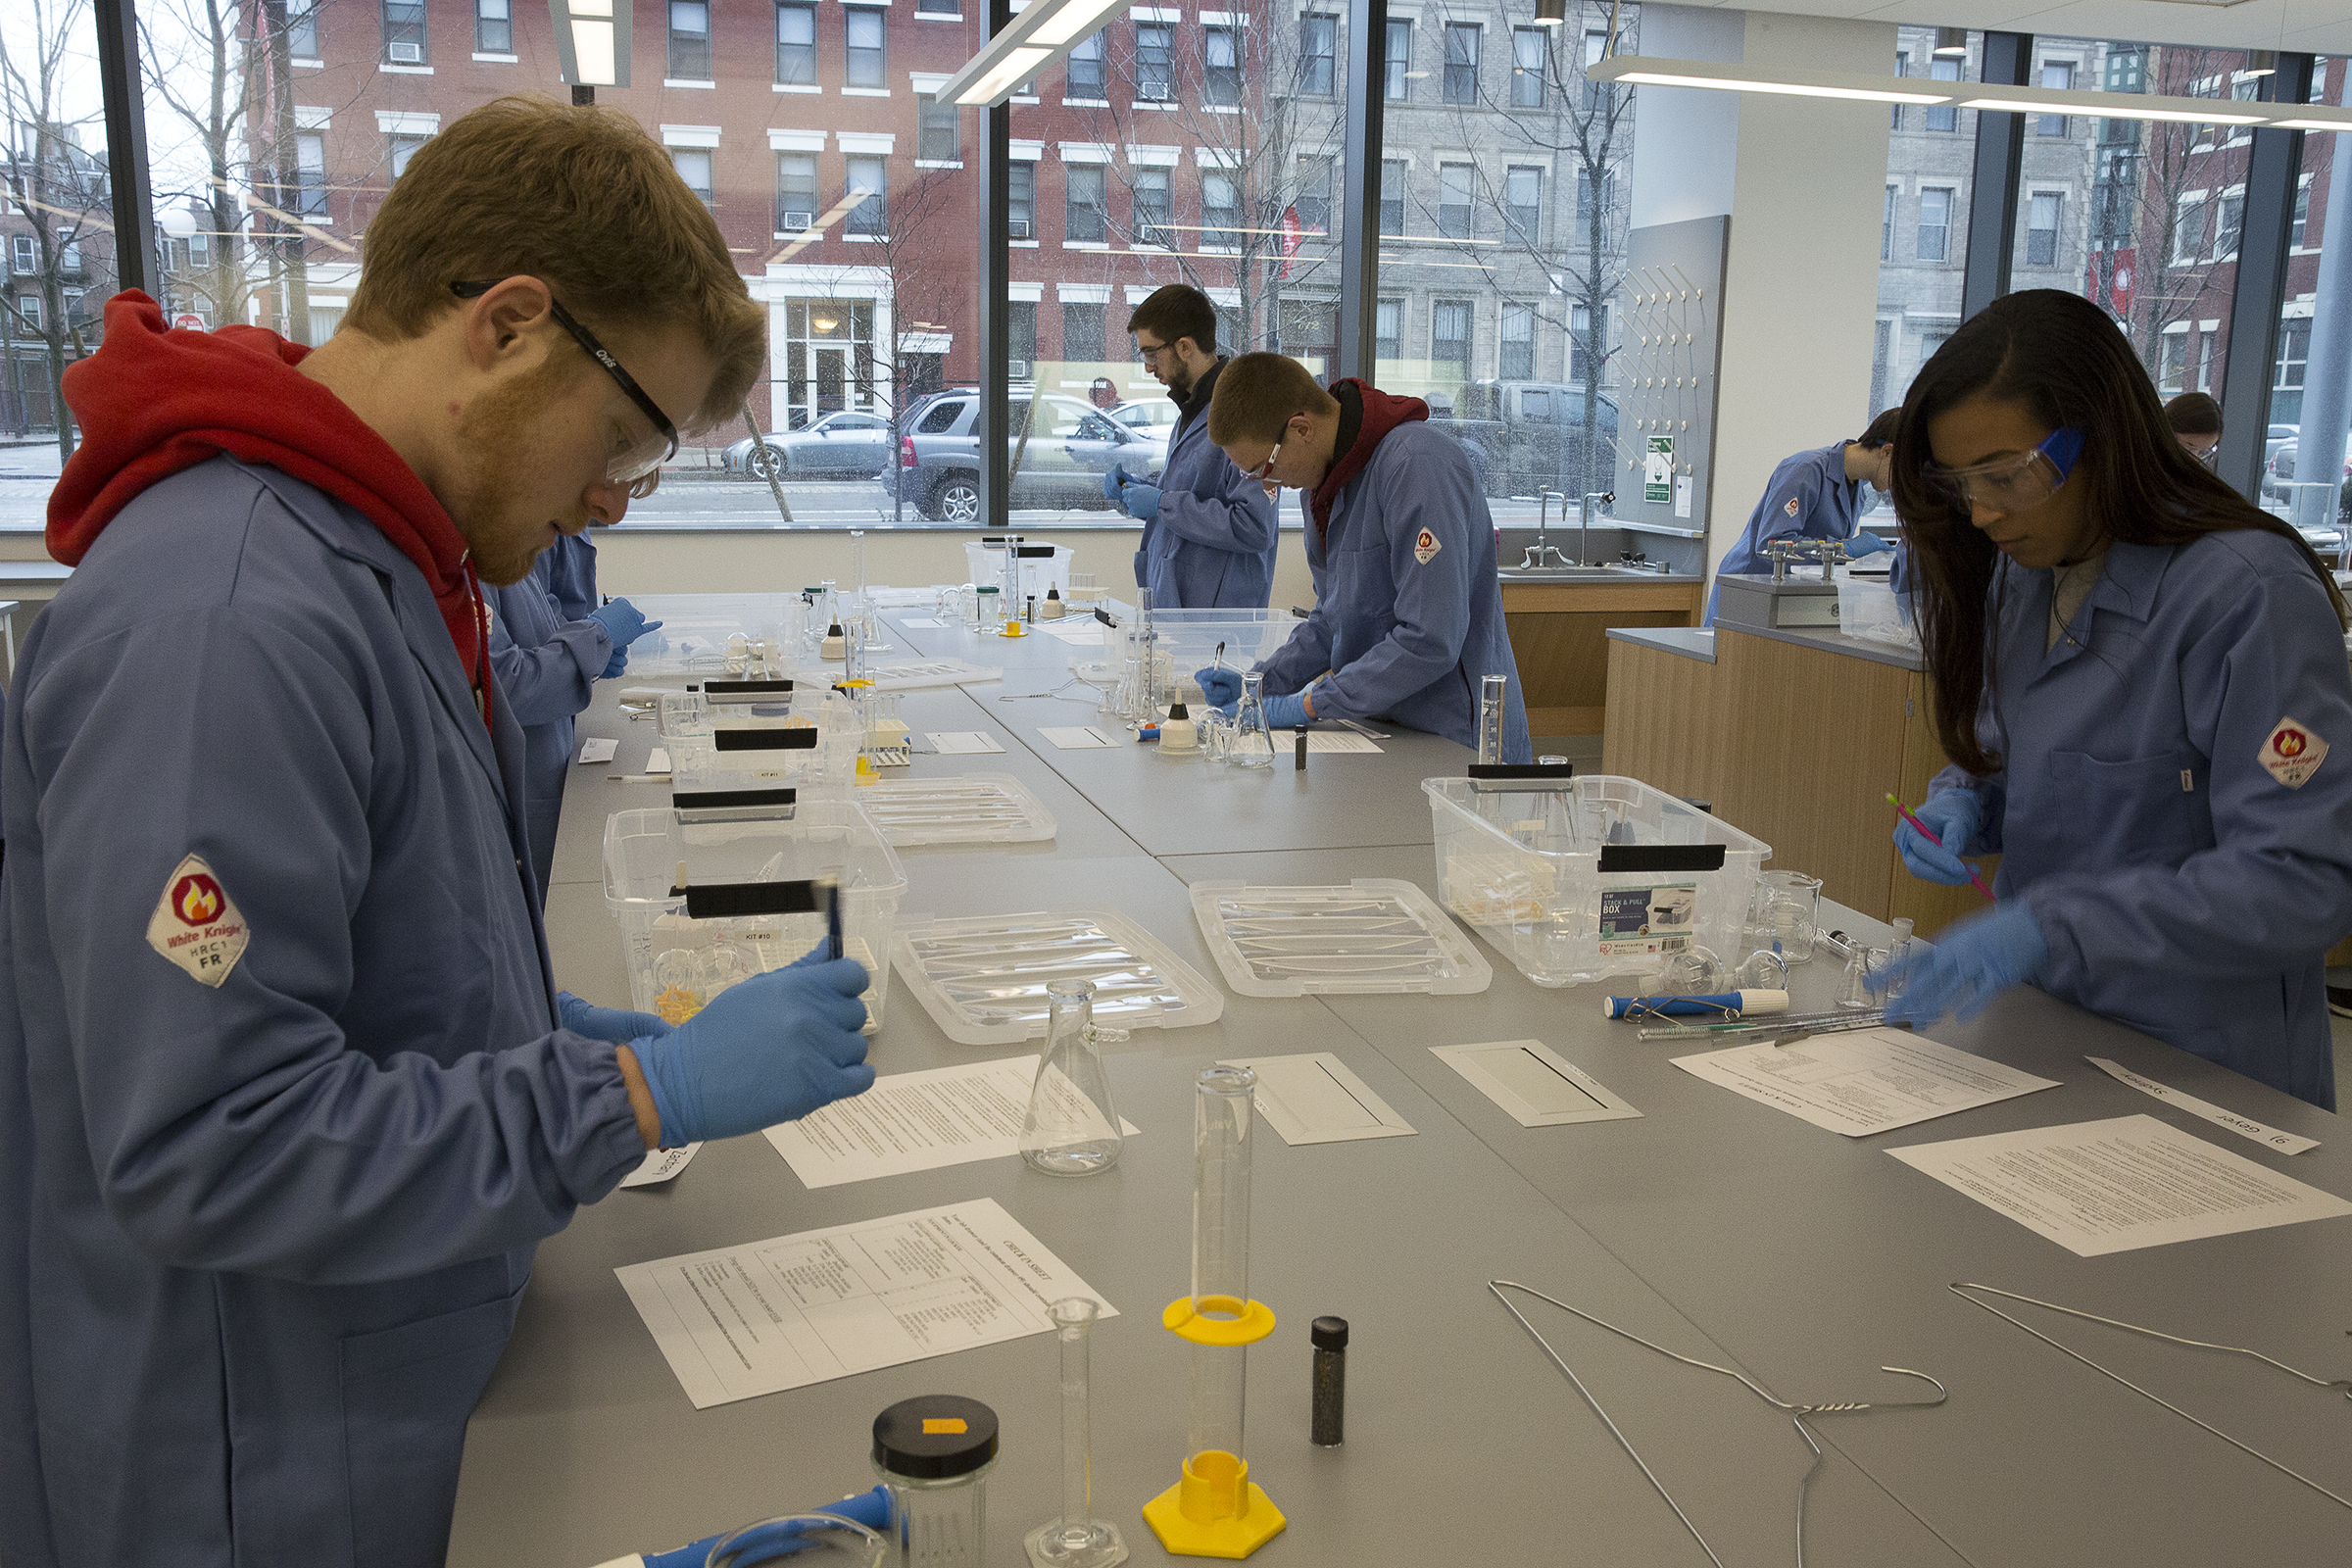 Several students work at a lab bench with large windows behind them.